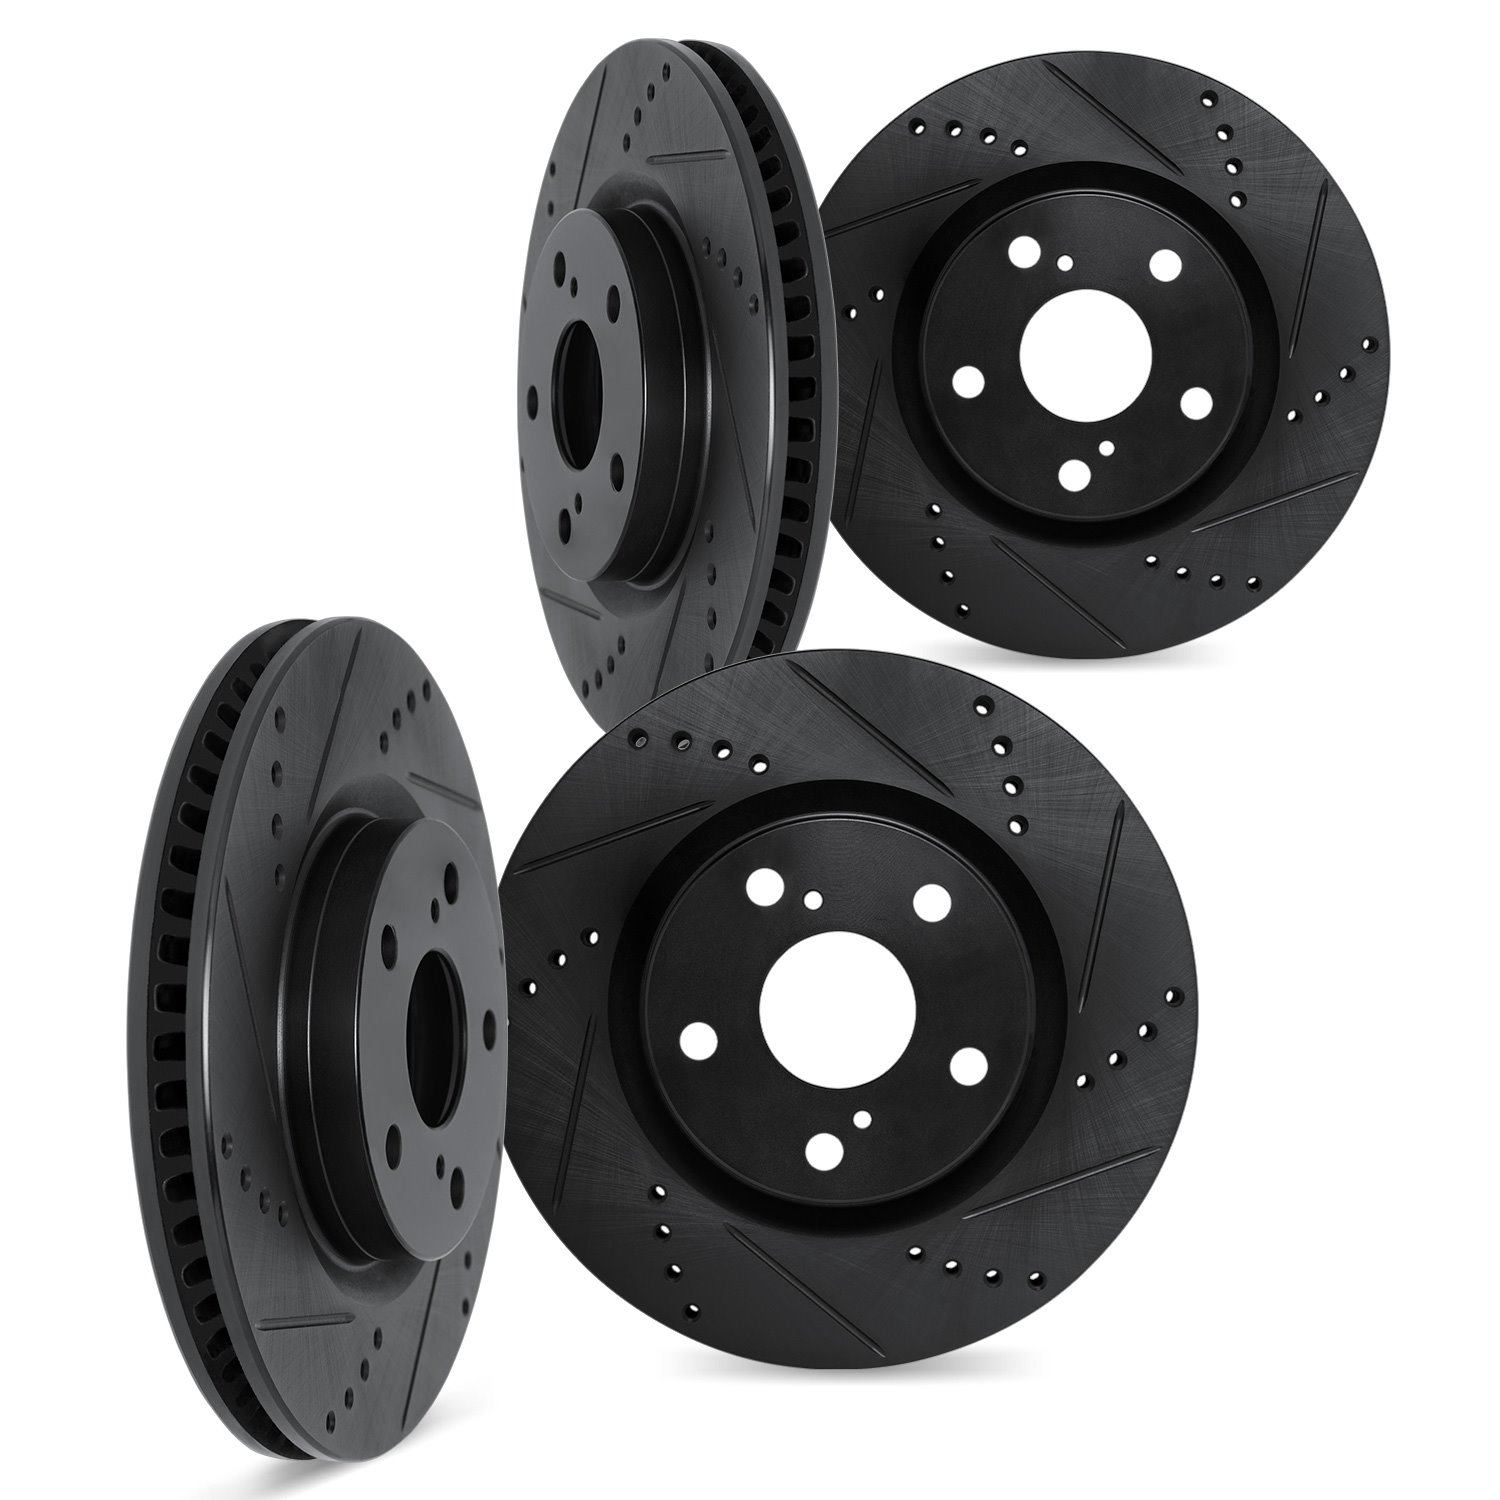 8004-76113 Drilled/Slotted Brake Rotors [Black], 1991-1995 Lexus/Toyota/Scion, Position: Front and Rear